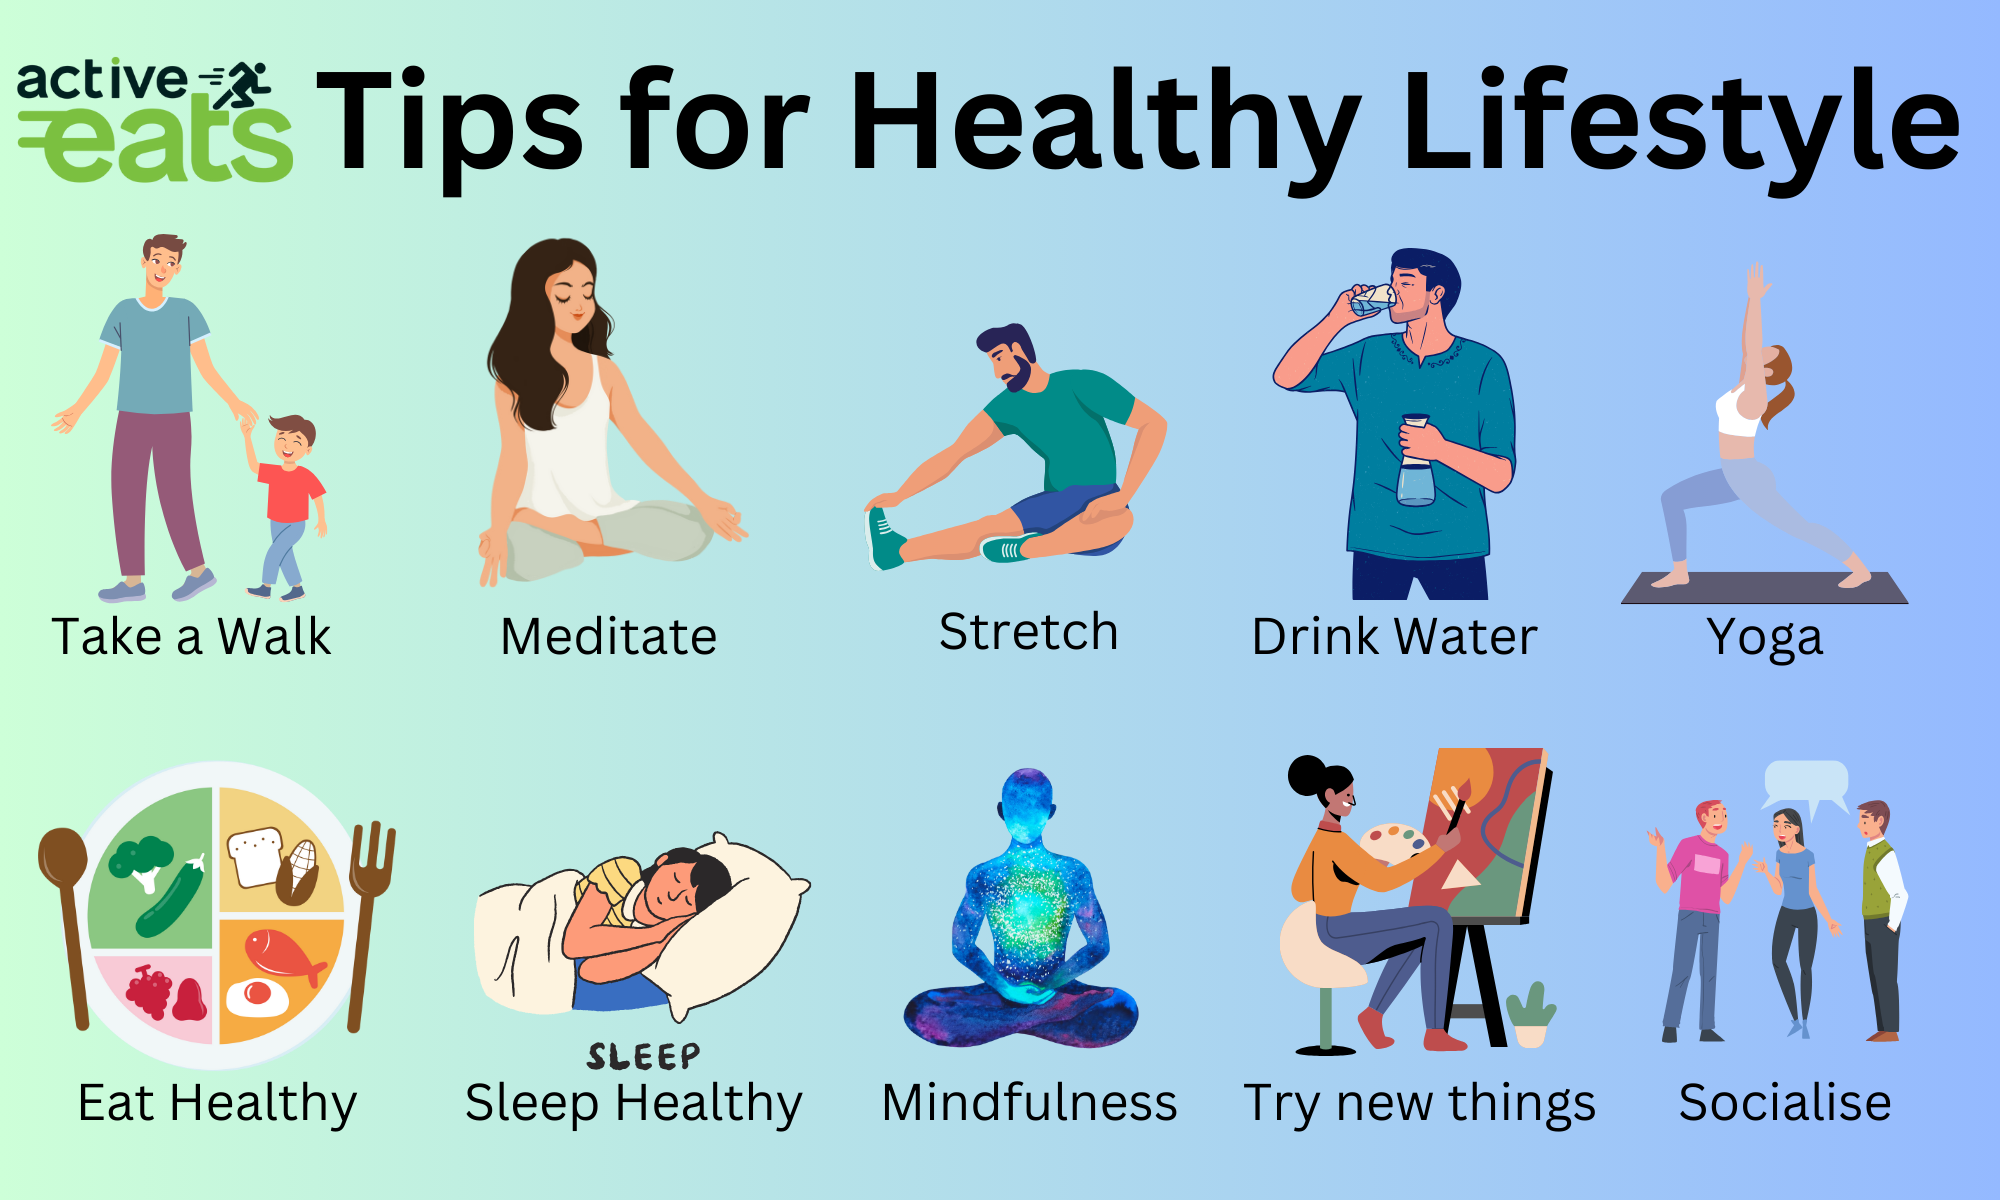 Basic tips and suggestions to includes in your life for overall healthy lifestyle.